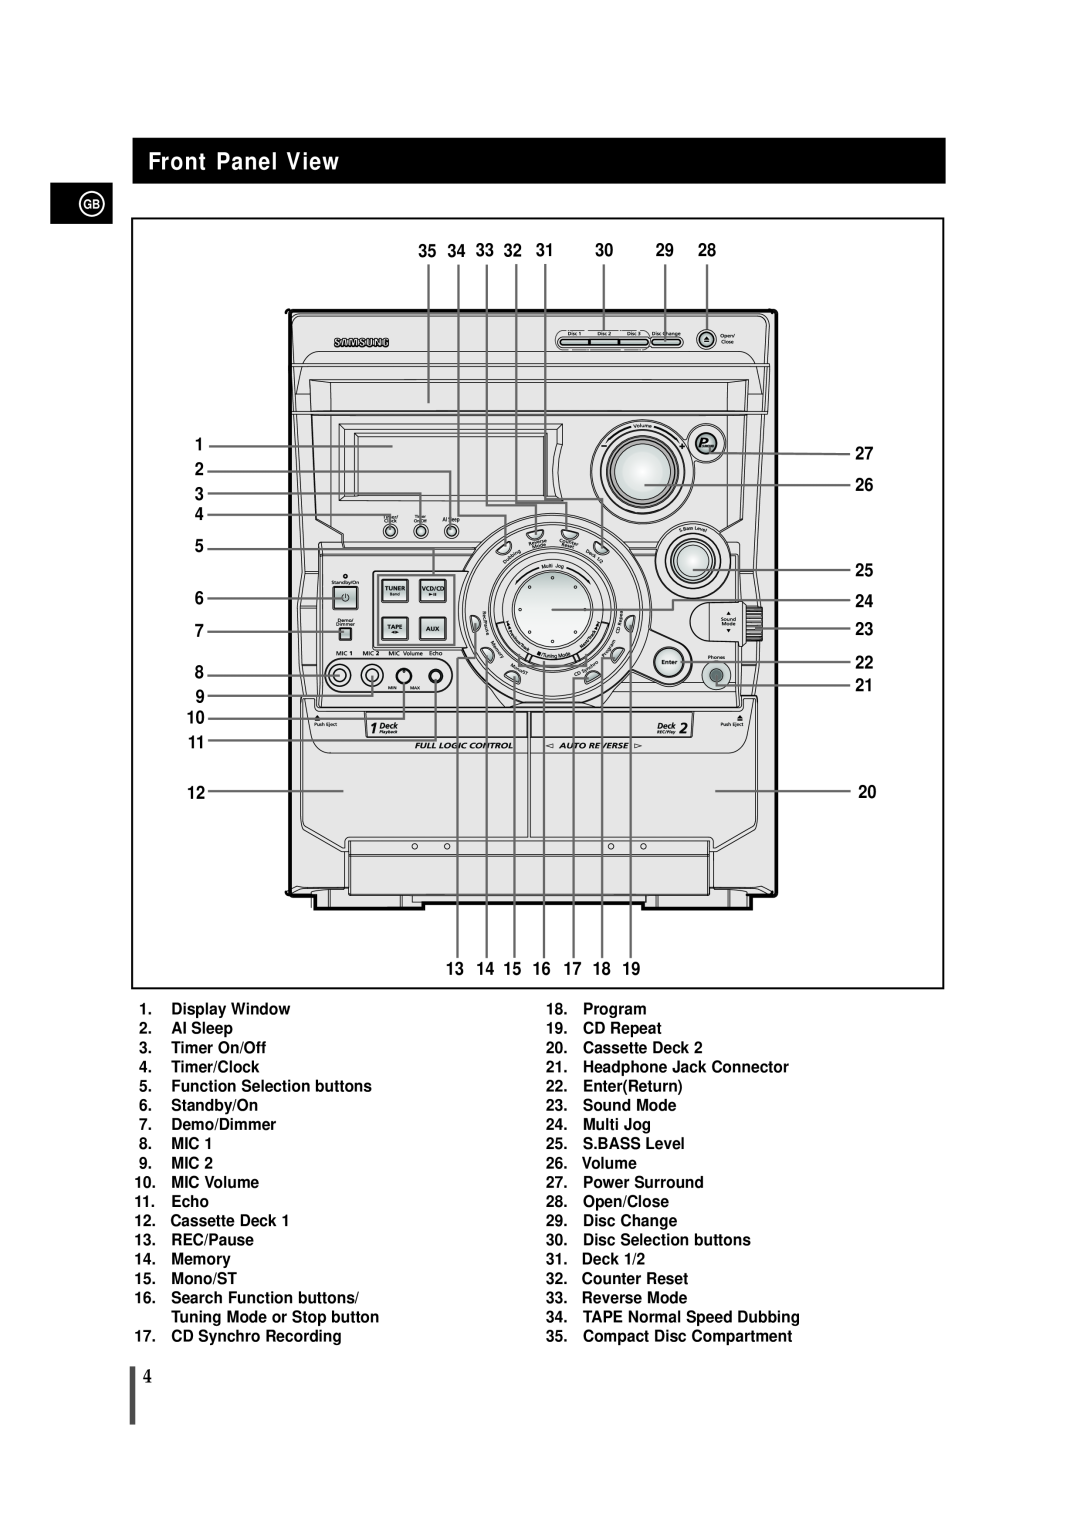 Samsung MAX-VB550, AH68-01145B instruction manual Front Panel View, TAPE Normal Speed Dubbing 